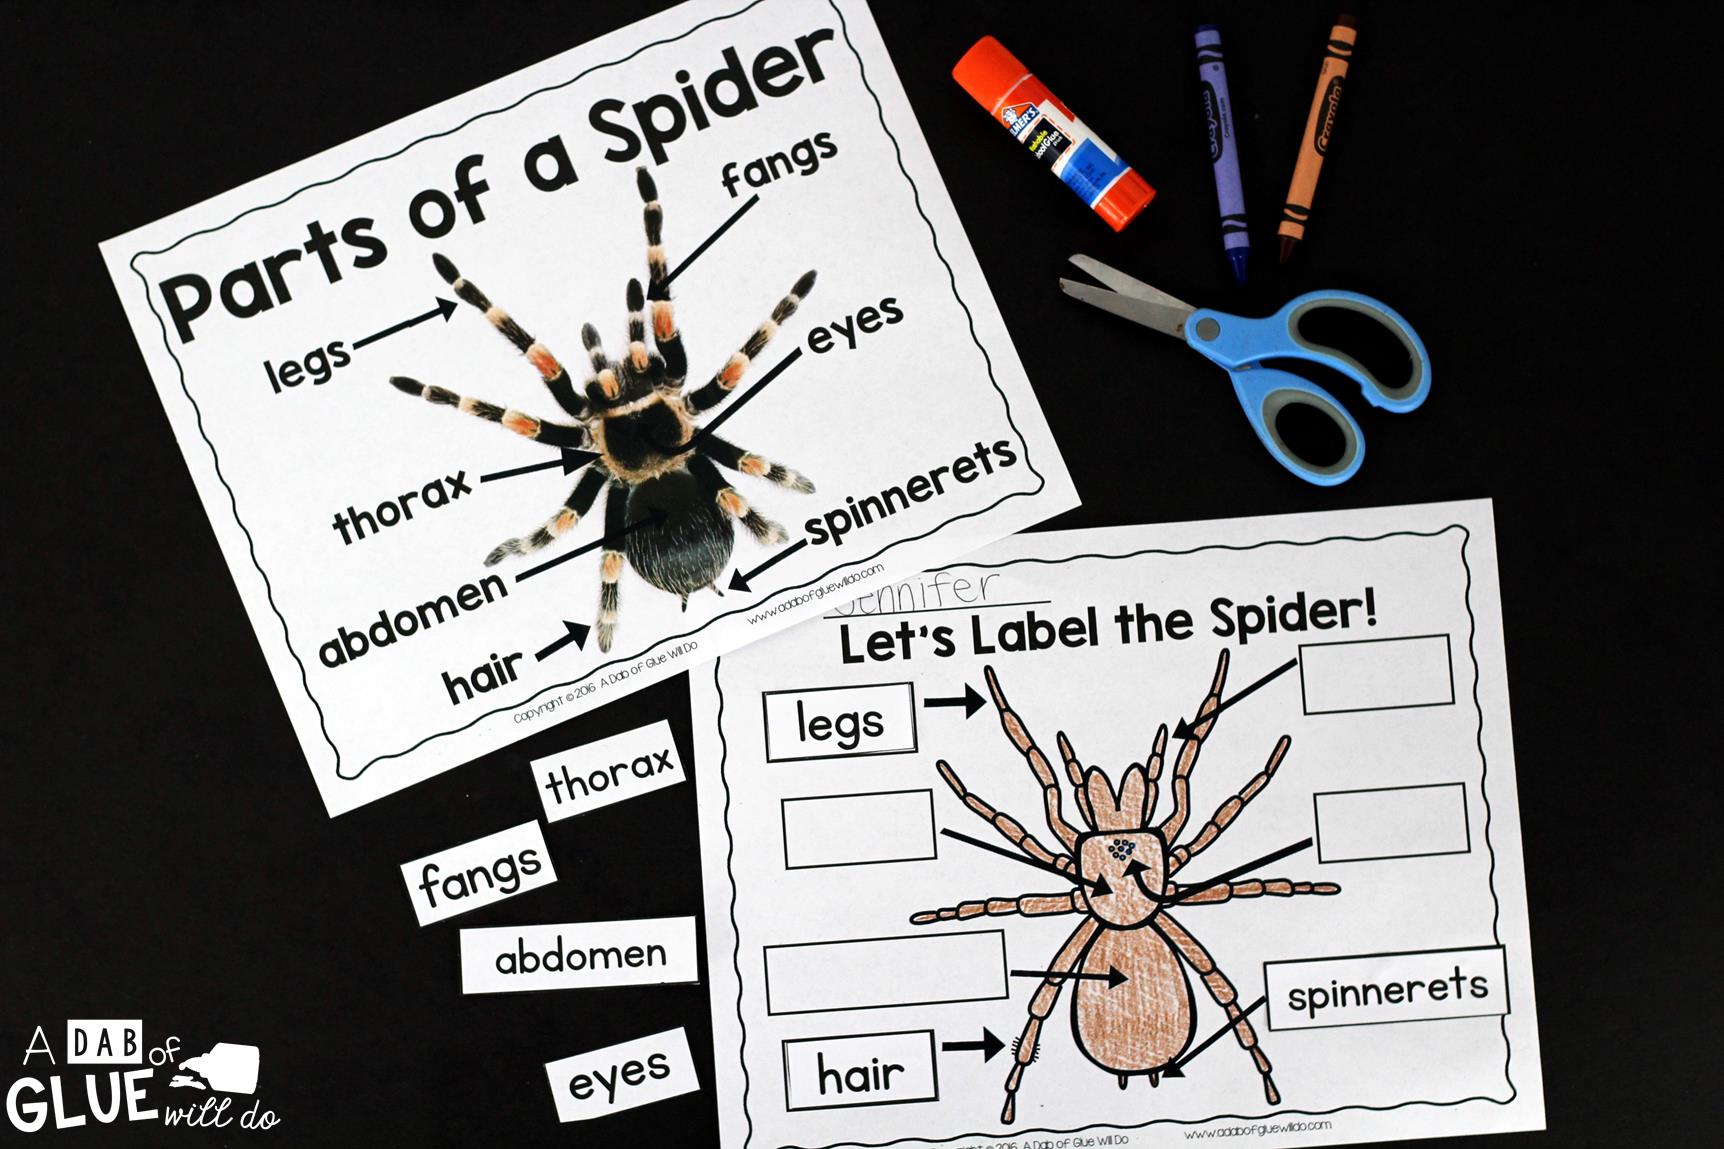 Engage your class in an exciting hands-on experience learning all about spiders! This Spiders: An Animal Study is perfect for science in Preschool, Pre-K, Kindergarten, First Grade, and Second Grade classrooms and packed full of inviting science activities. Students will learn about the difference between spiders and insects, parts of a spider, a spider's life cycle, and many more fun facts. When students are done they can complete a spider research project. This pack is great for homeschoolers, kids craft activities, and to add to your unit studies!